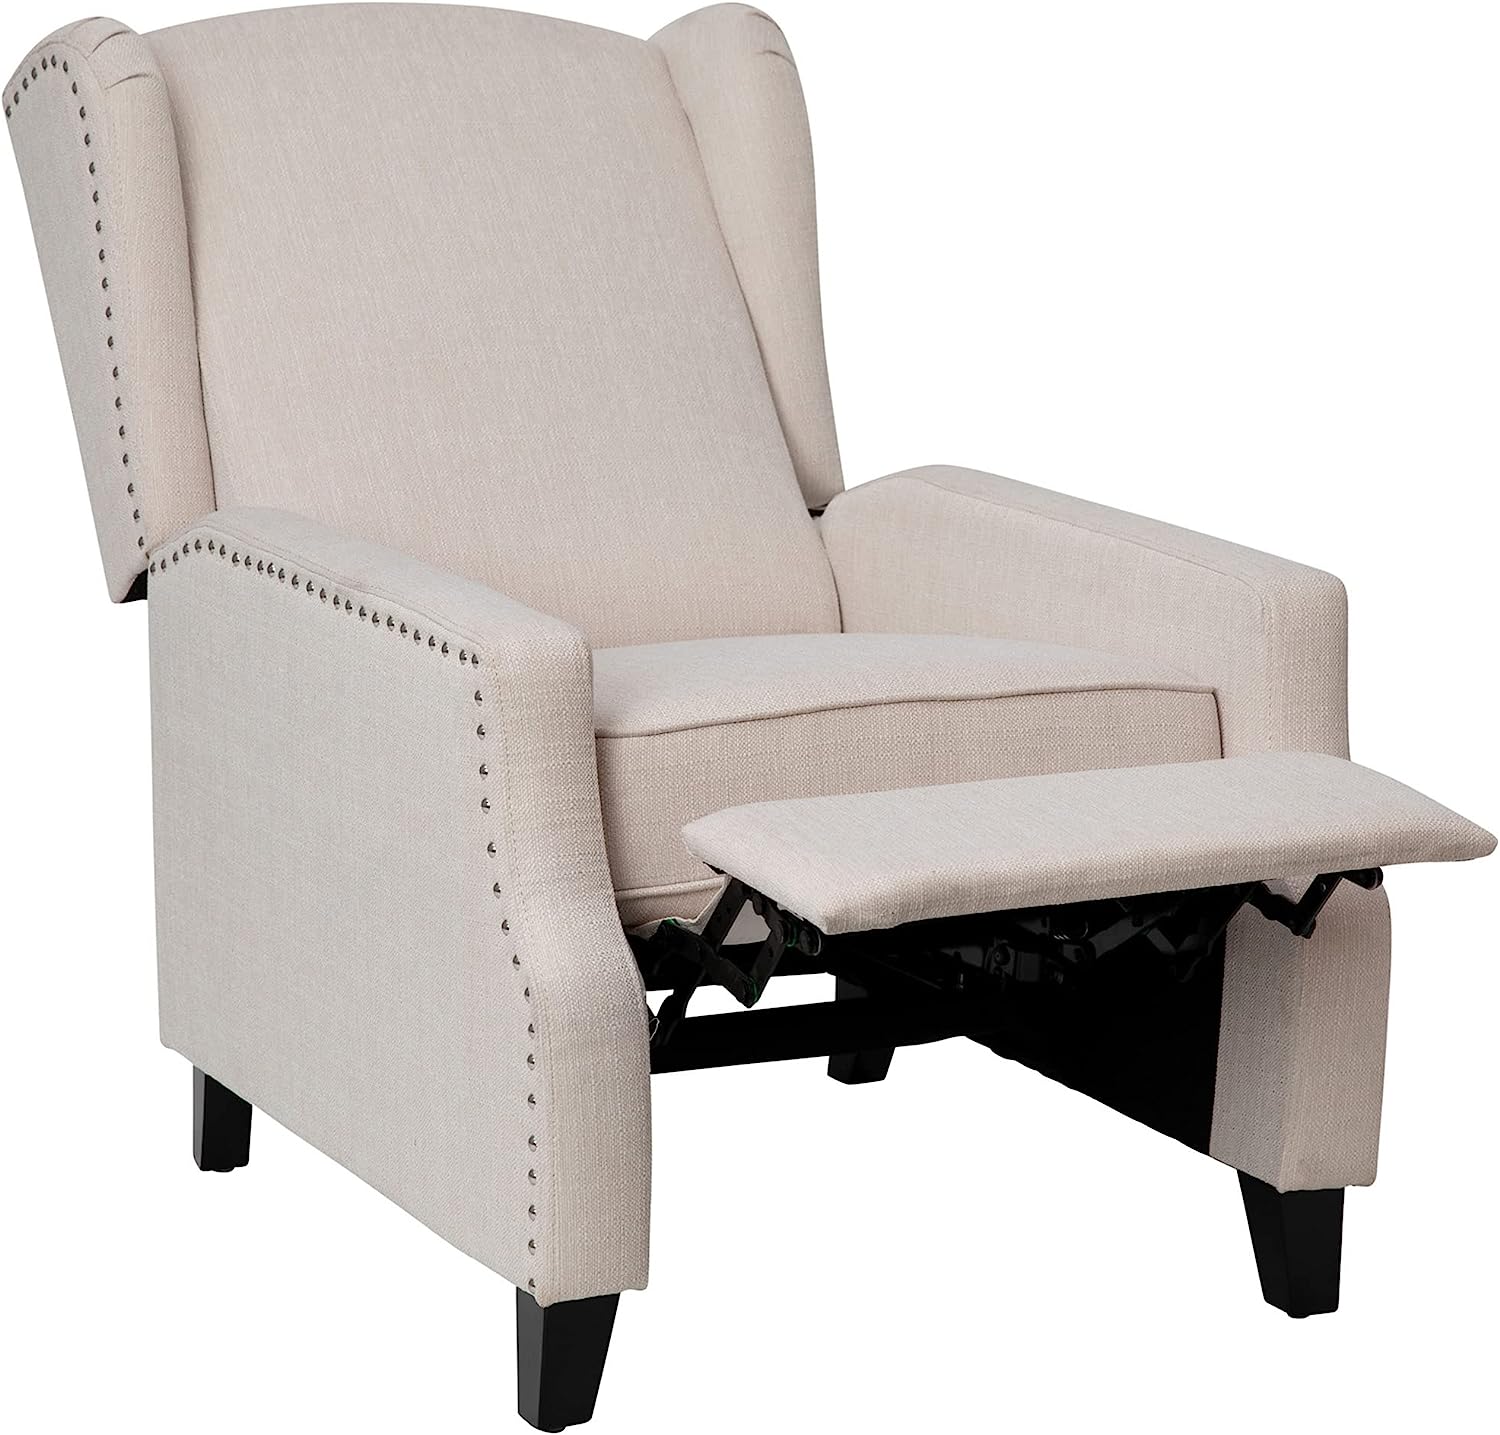 Flash Furniture Prescott Traditional Style Slim Push Back Recliner Chair - Wingback Recliner with Cream Fabric Upholstery - Accent Nail Trim